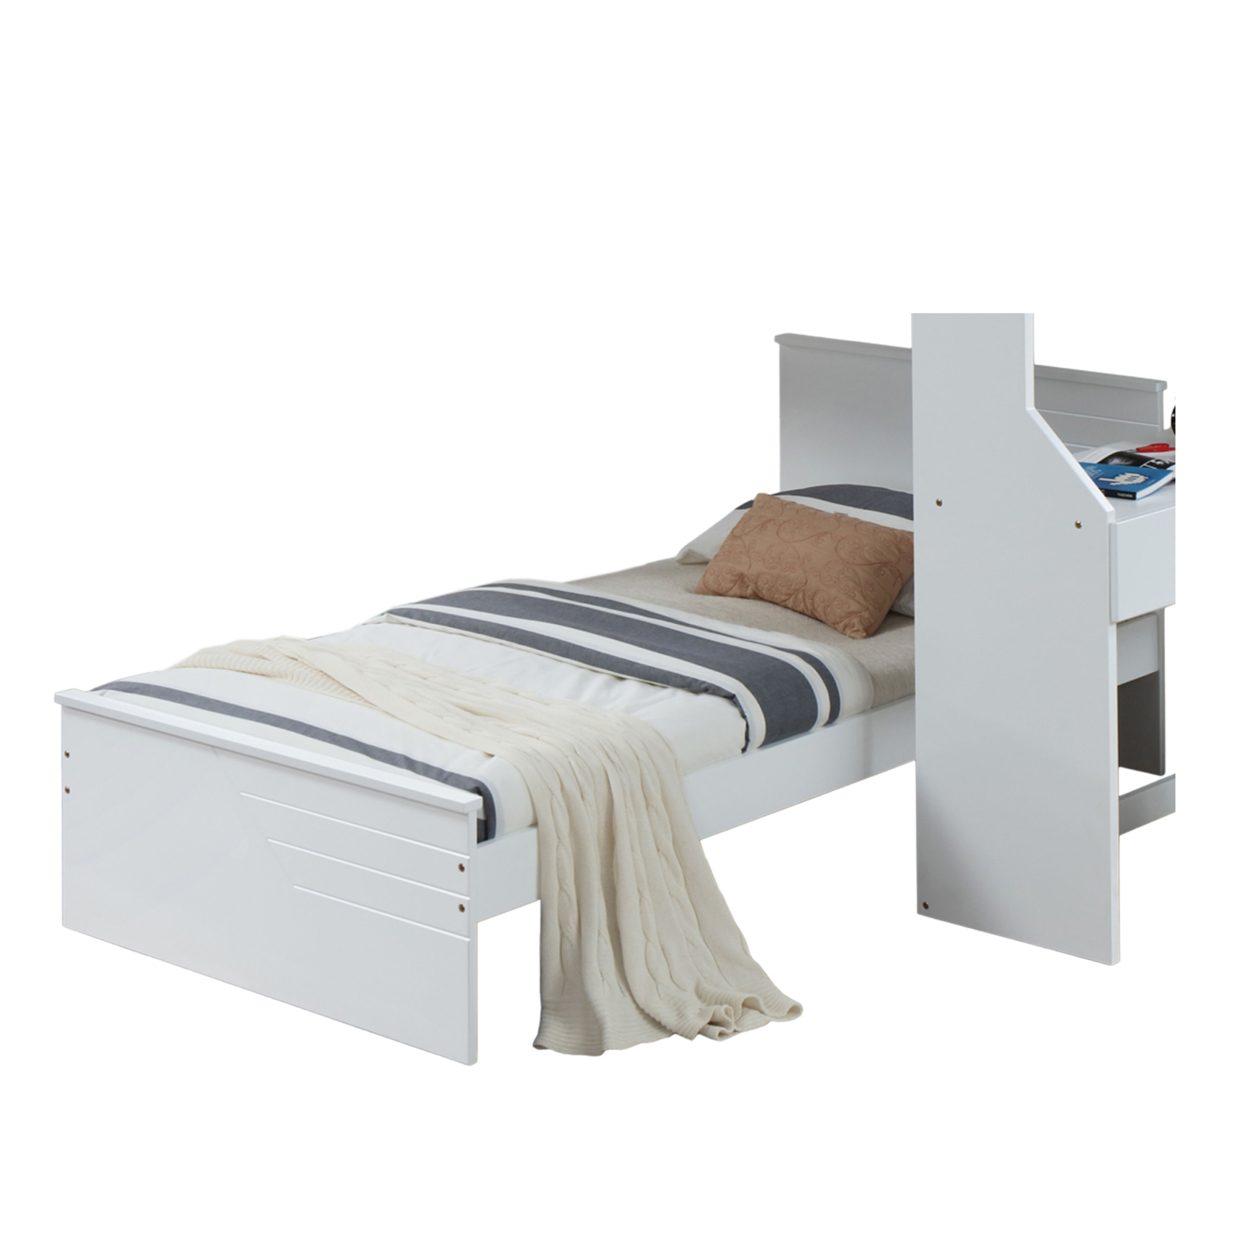 Modern Twin Size Wooden Panel Bed With Low Profile Footboard, White- Saltoro Sherpi